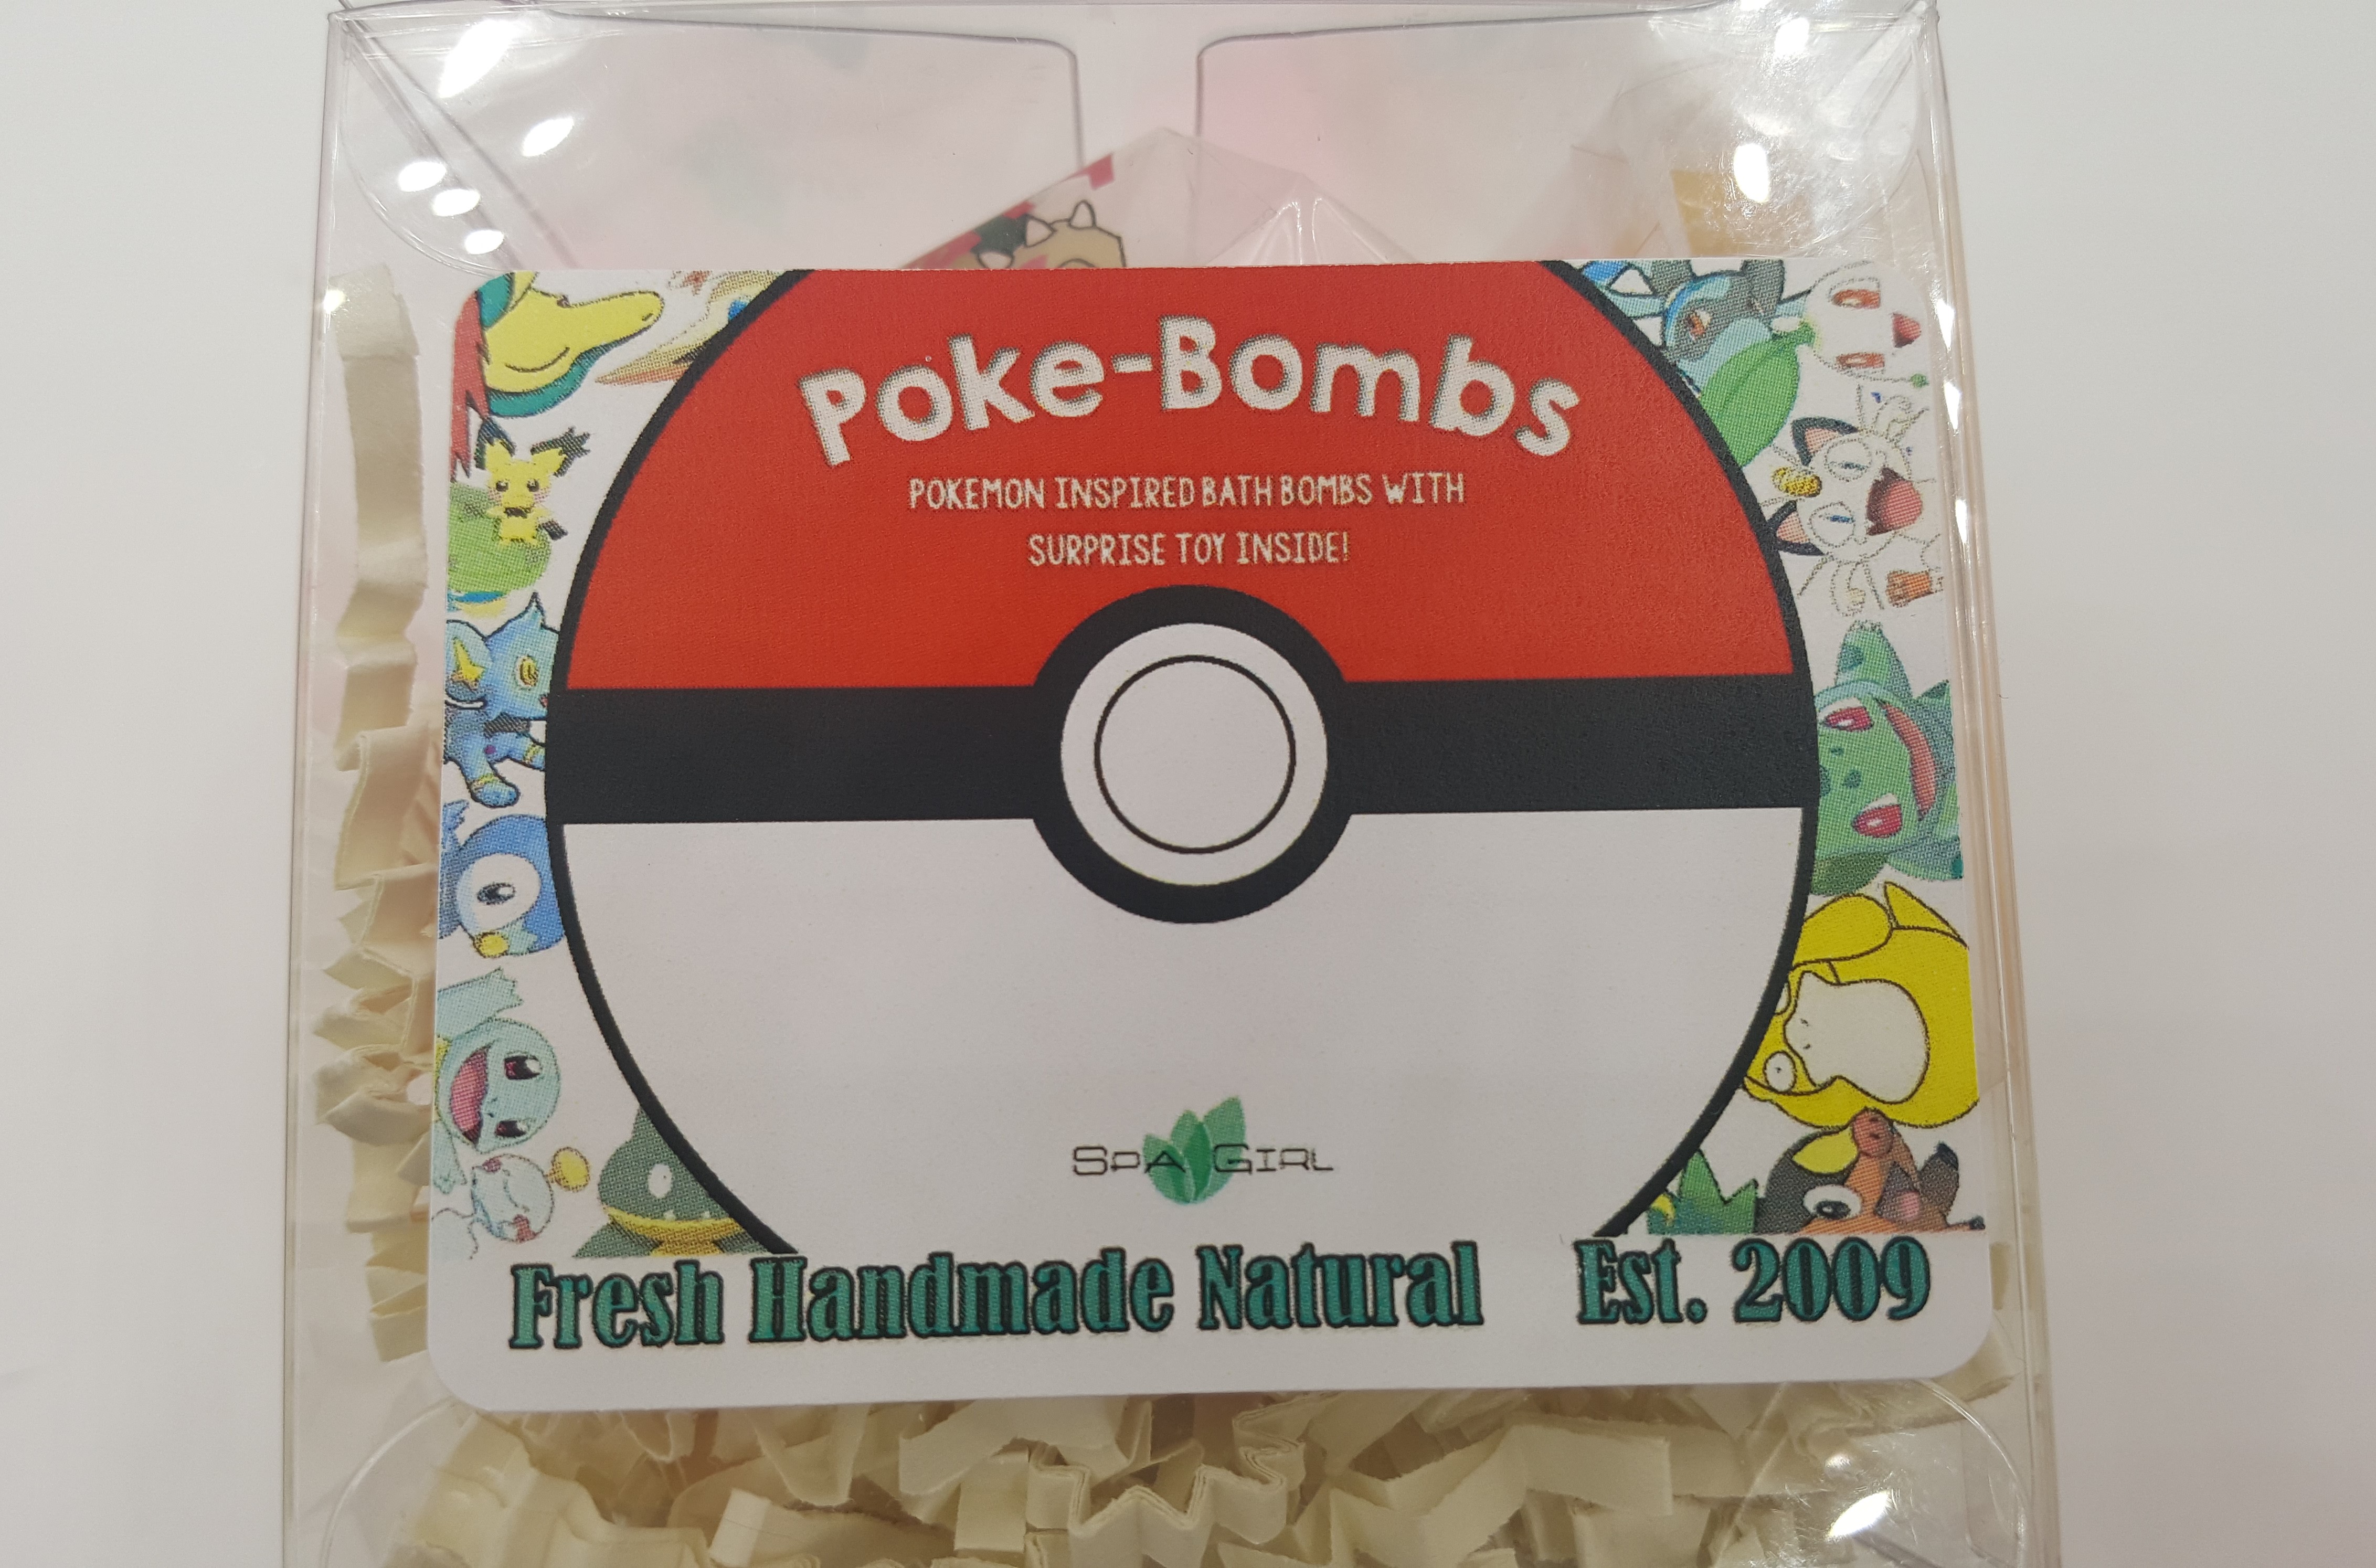 Spa Pure Kids Poke-Bomb Bath Bomb with Poke-Mon Toy Inside, USA Made (Pack of 1) - image 3 of 5